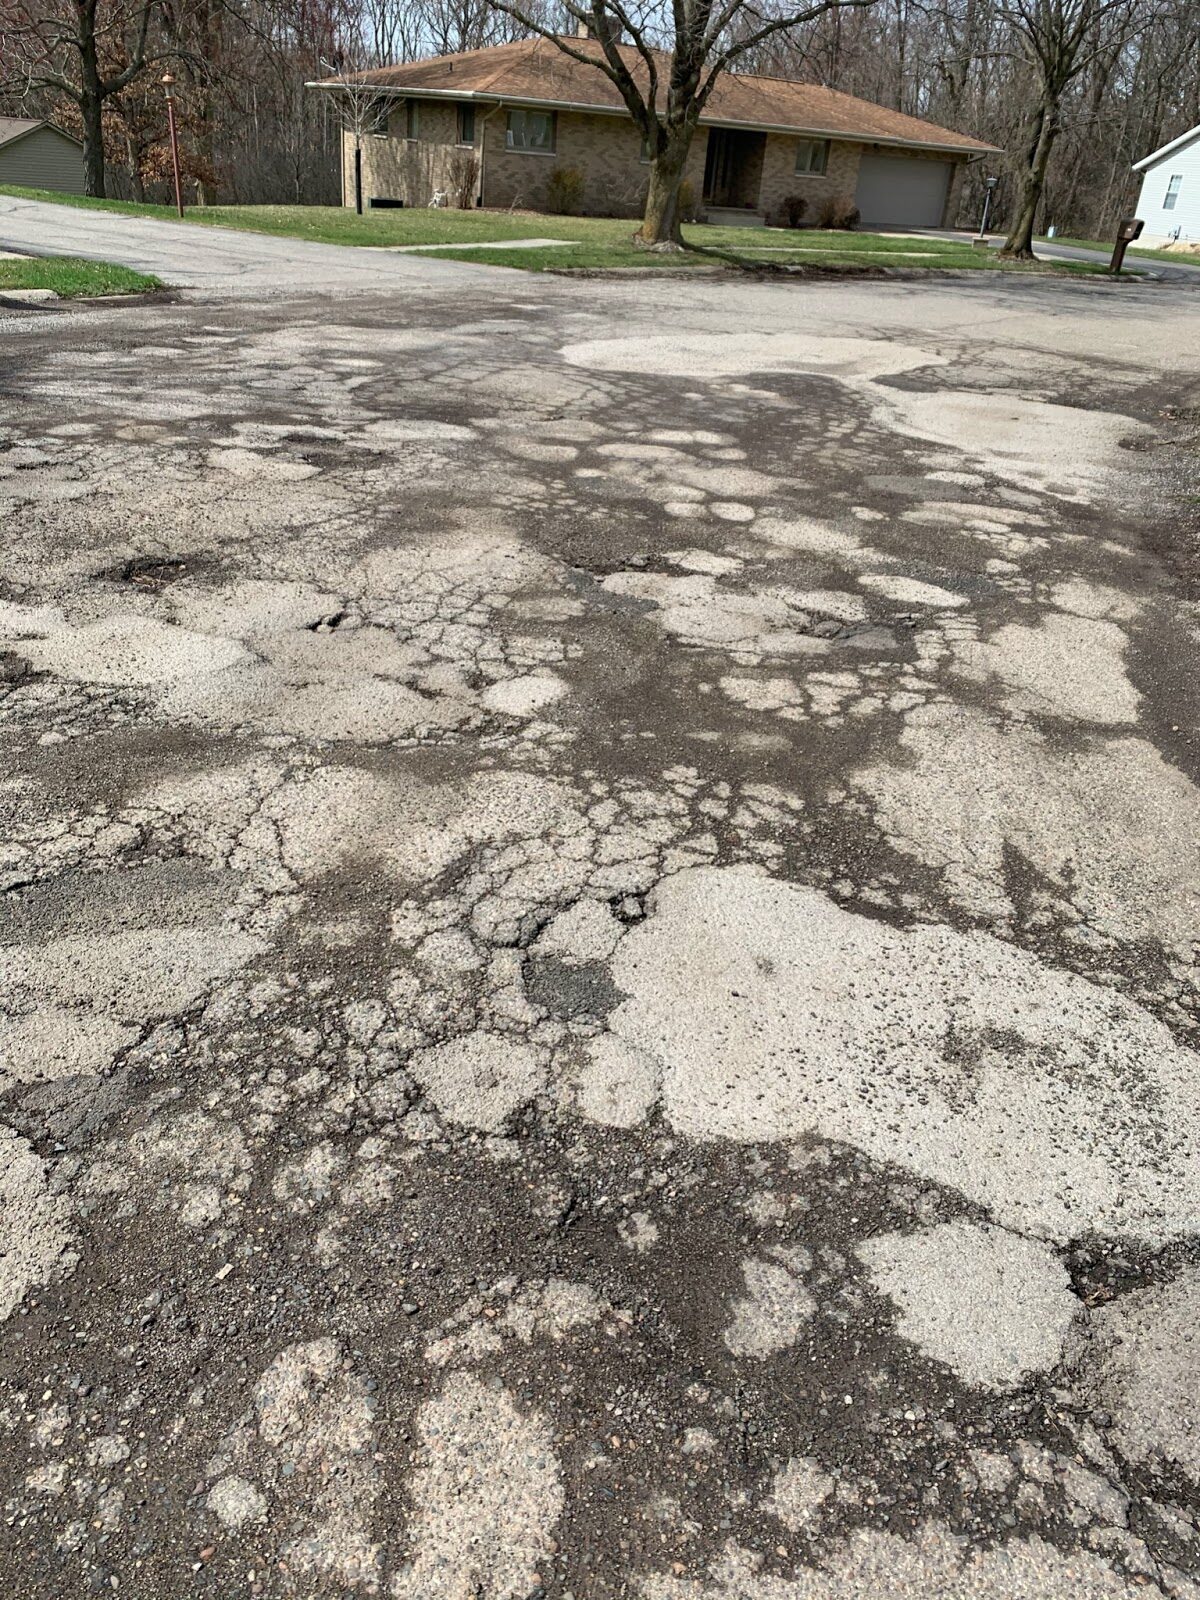 Study rates MI third worst for potholes in nation, officials plan road repairs.